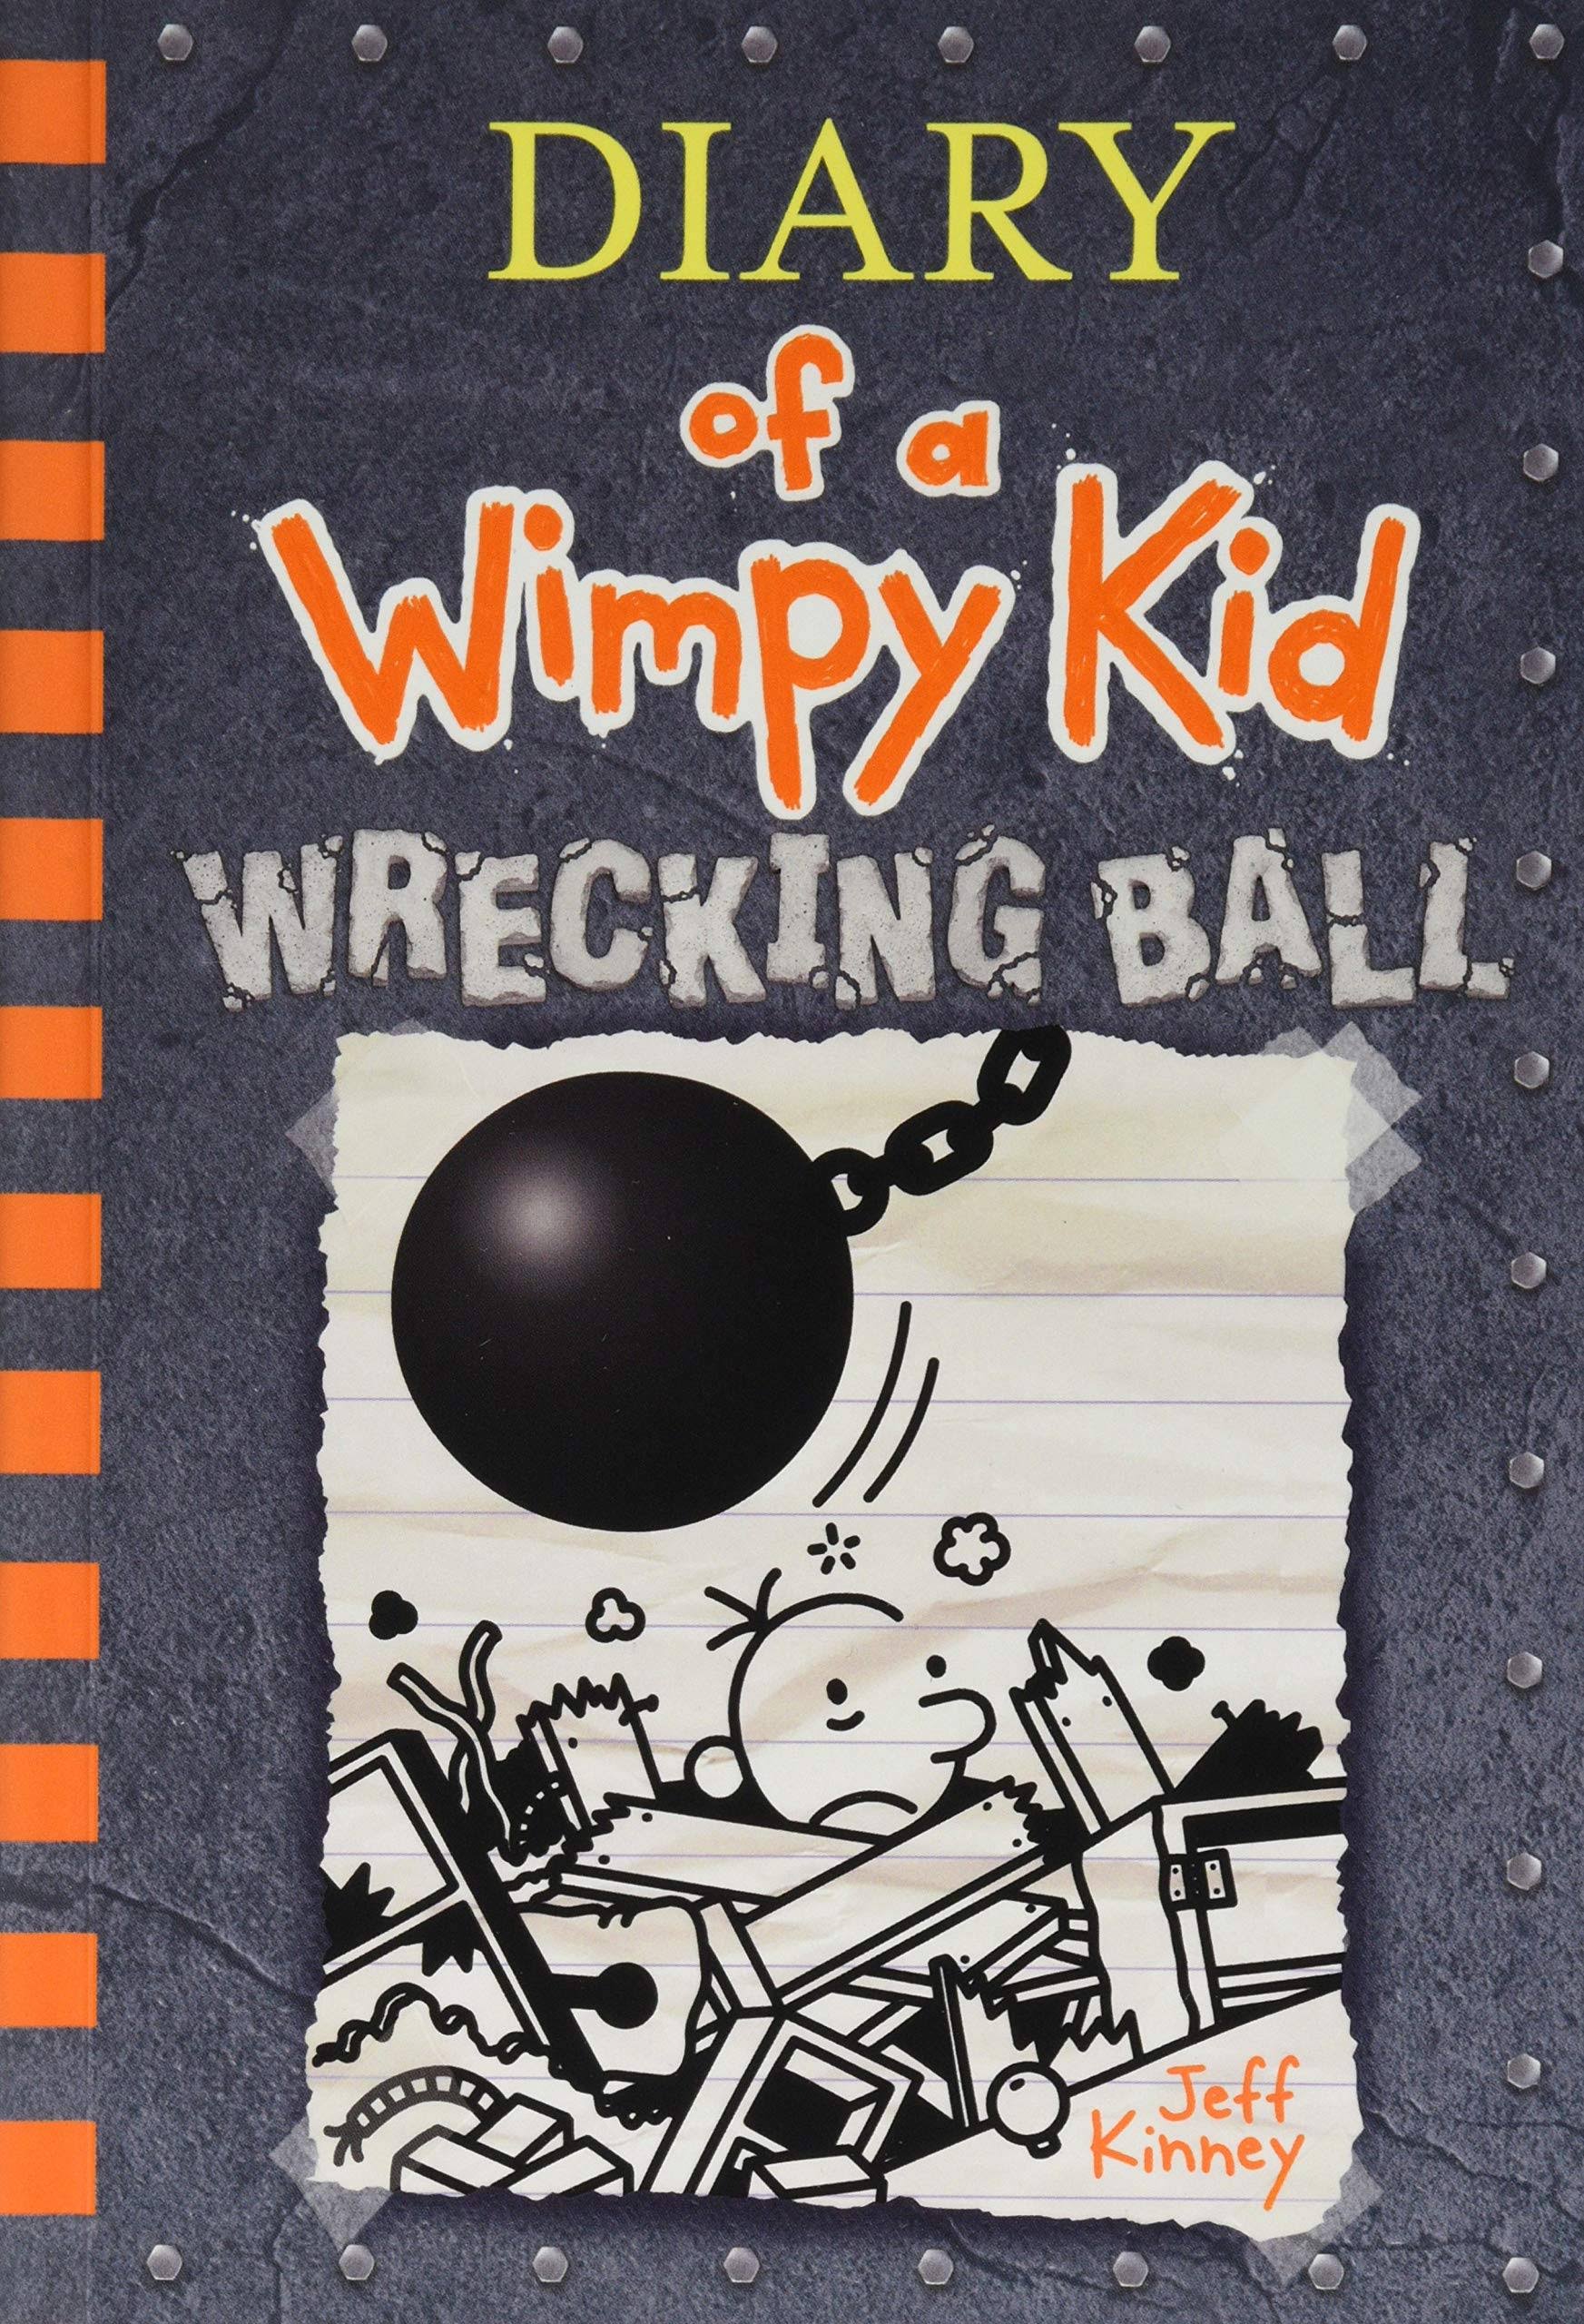 Wrecking Ball (Diary of a Wimpy Kid Book 14) [Book]